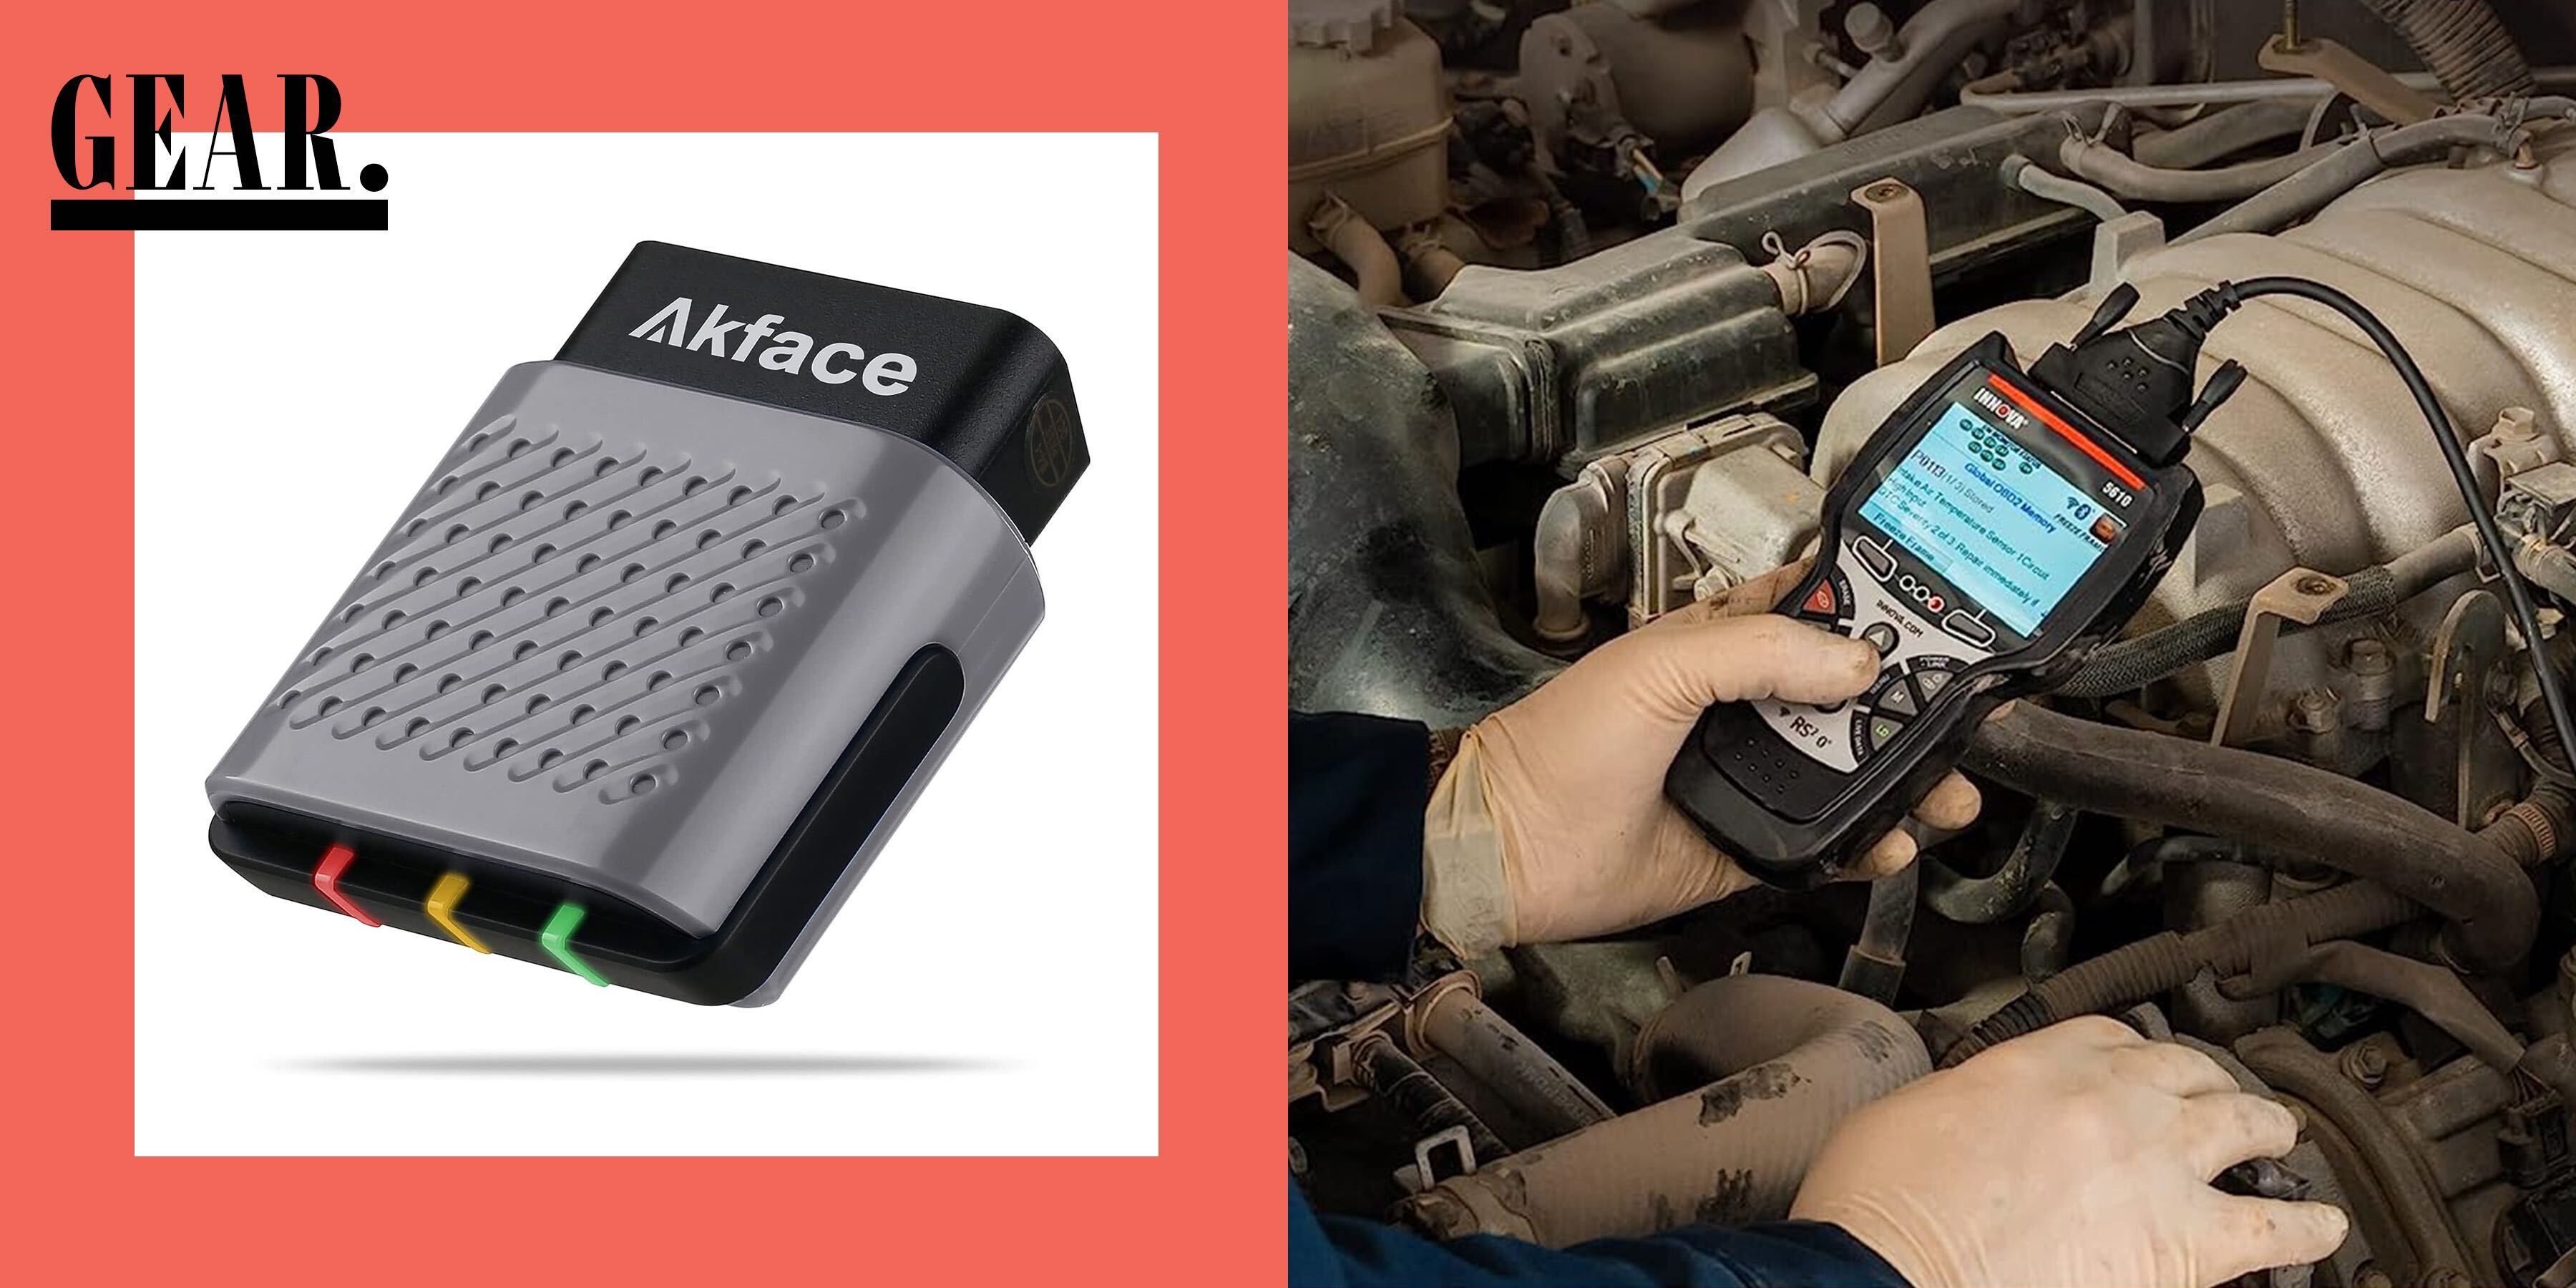 Best OBD2 Scanners for 2022 - CNET